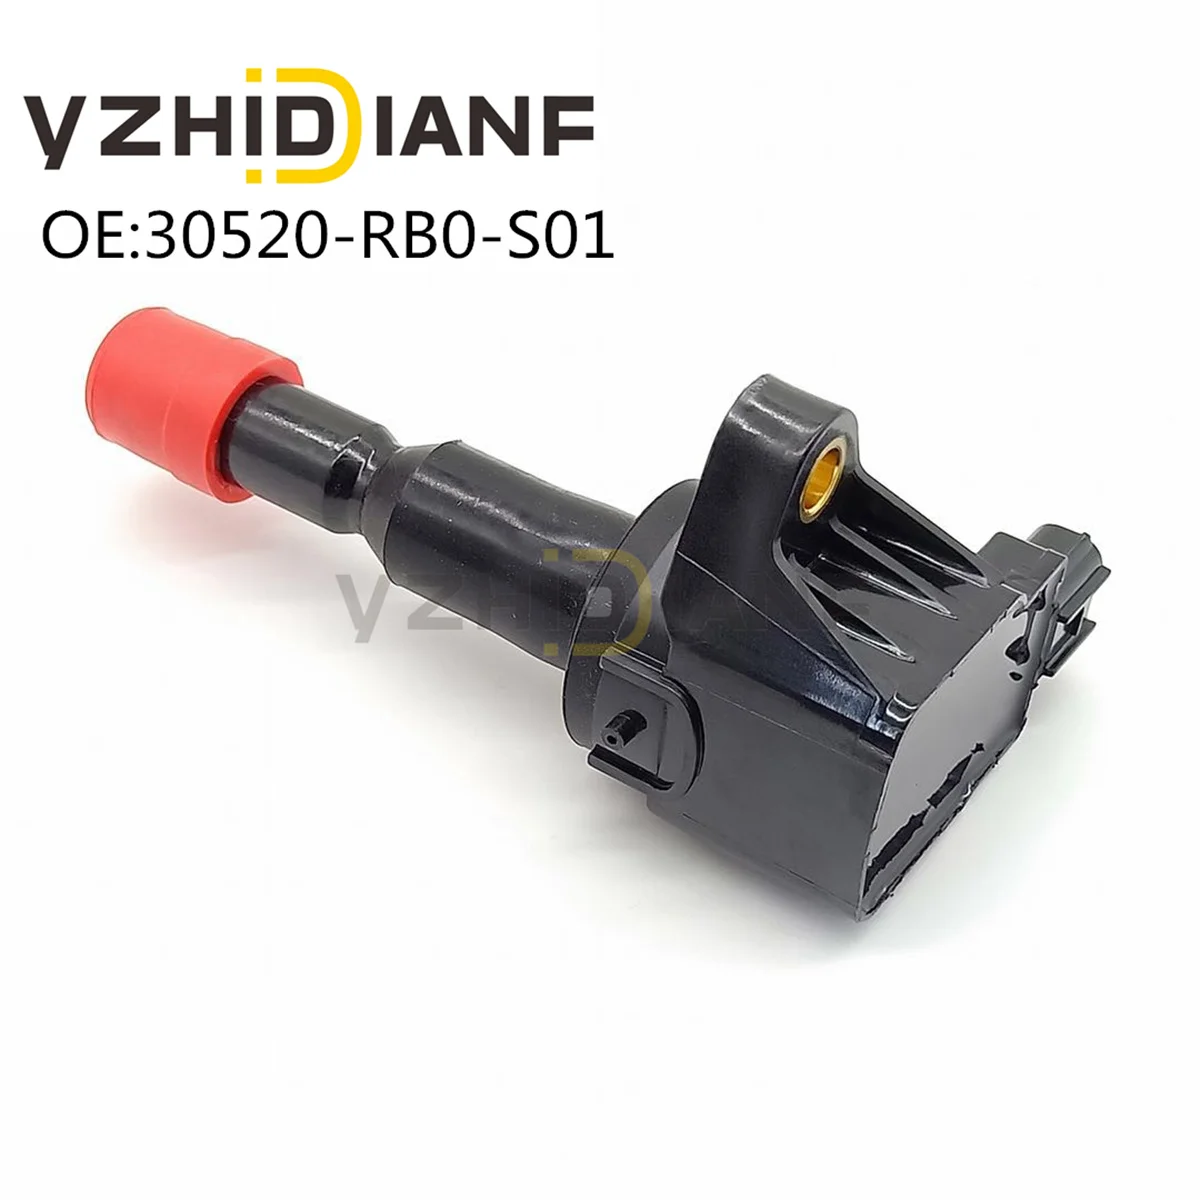 

1x CM11-116 4P Ignition Coil For HOND-A CITY CR-Z CIVIC FIT 08-2013 NO# 30520-RB0-003 30520-RB0-S01 UF-626 C1664 134003 CM11116